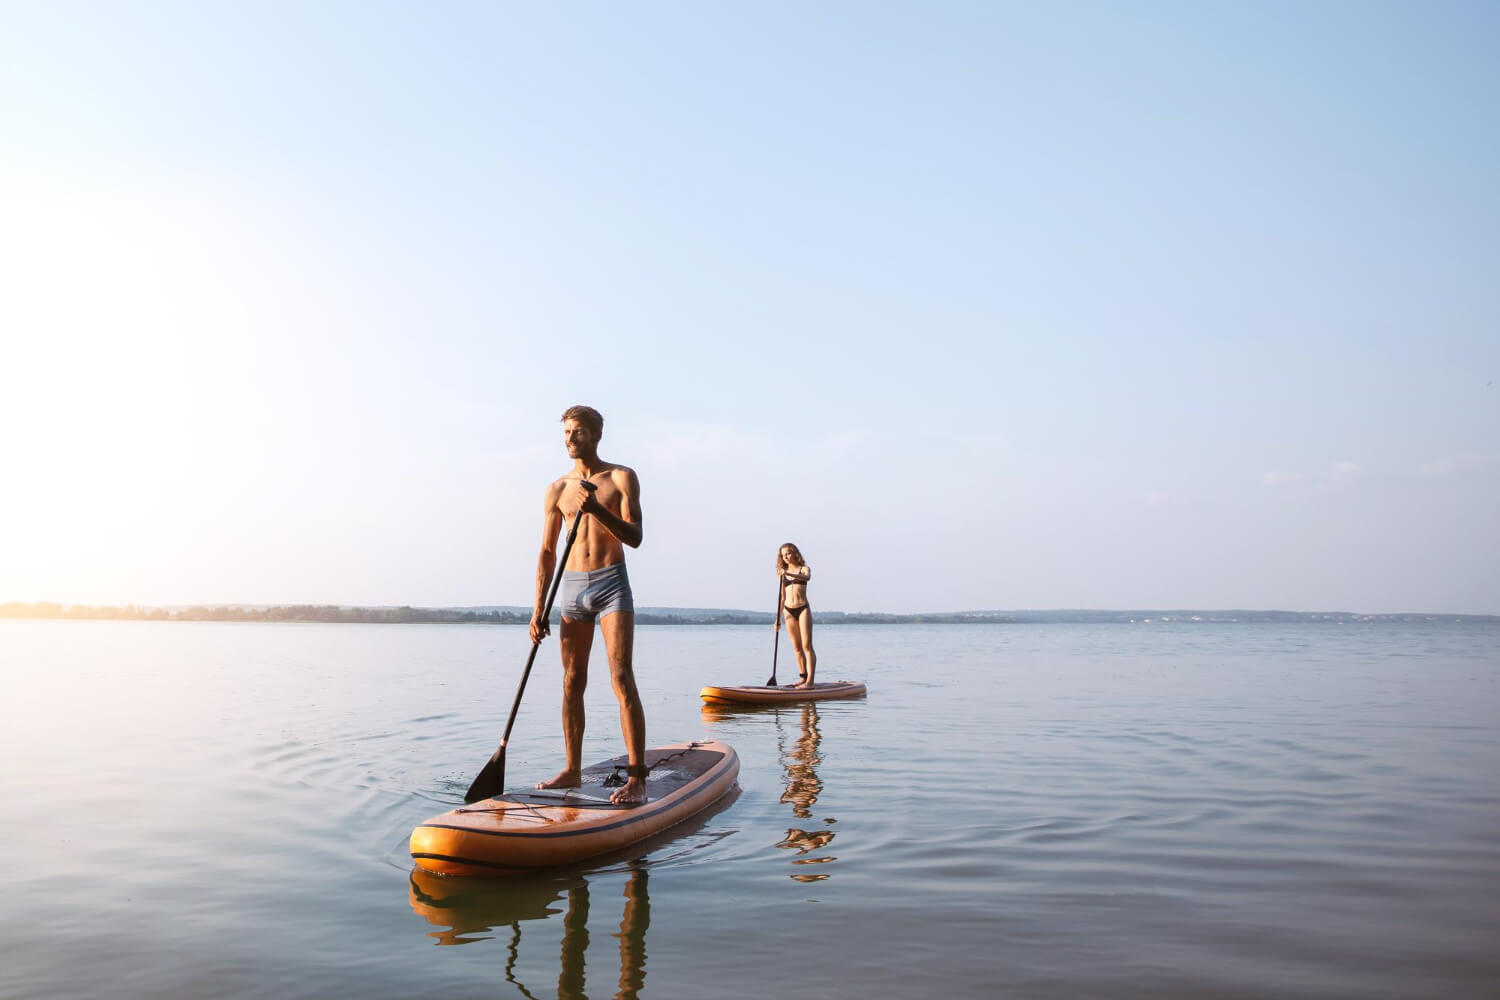 How to ride a stand up paddle board (SUP) properly